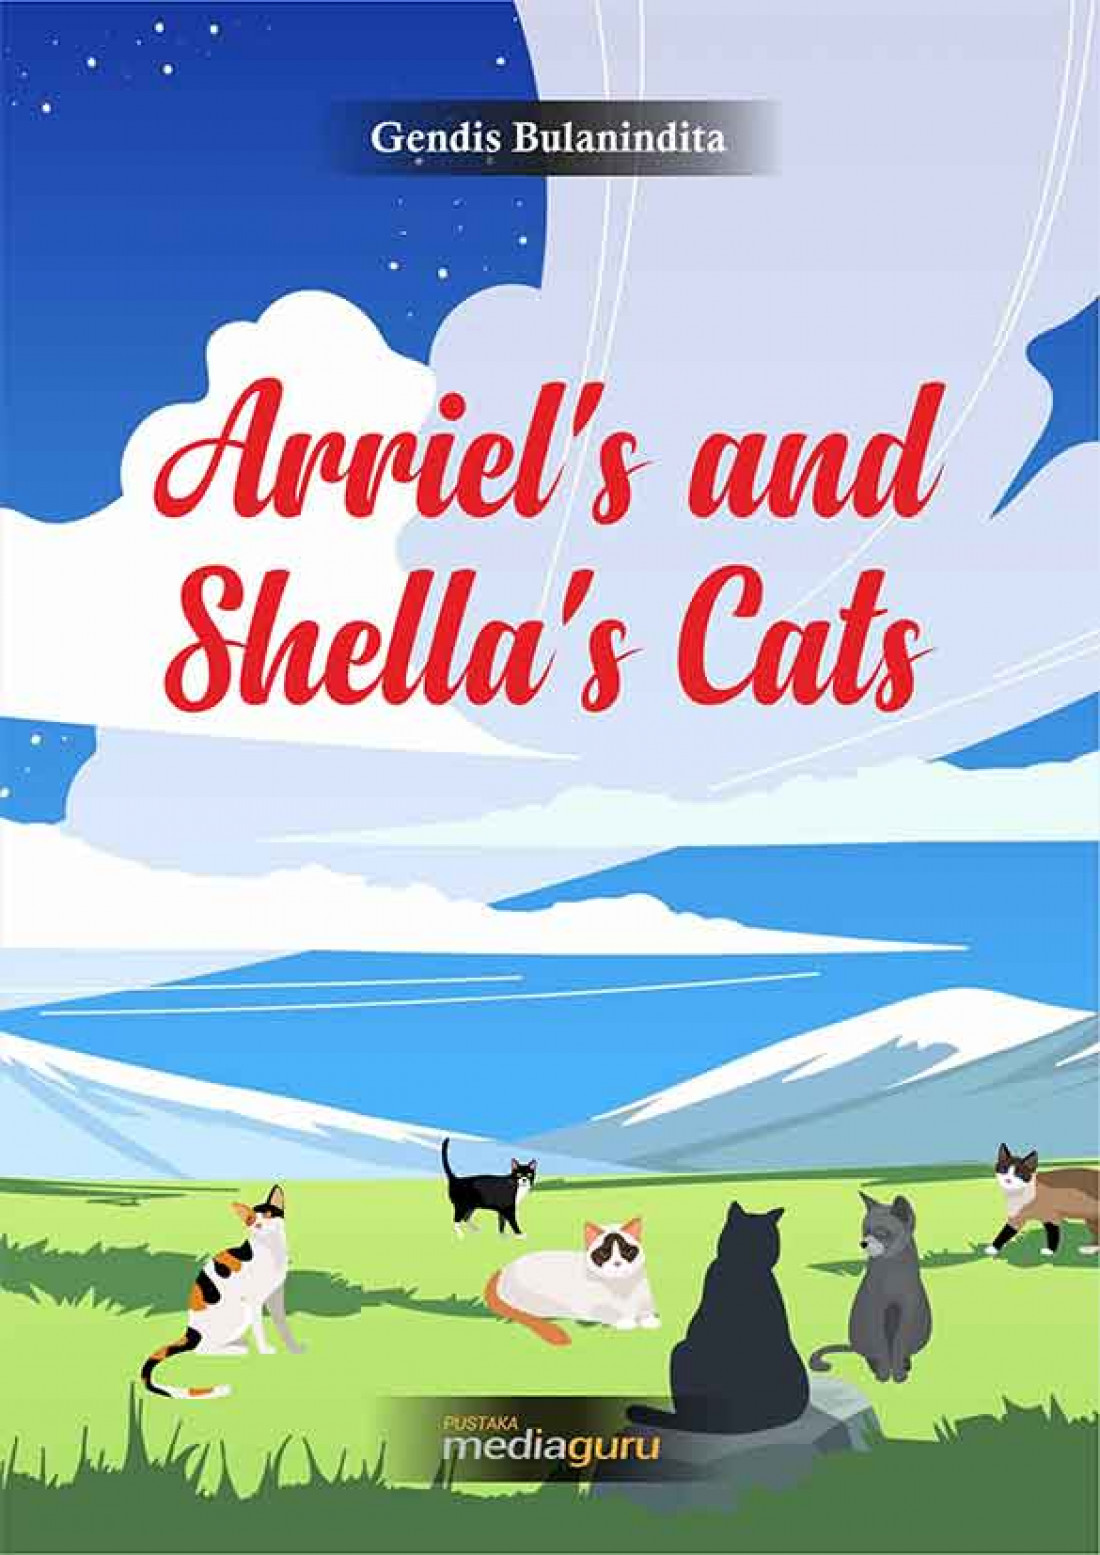 Arriel’s and Shella’s Cats